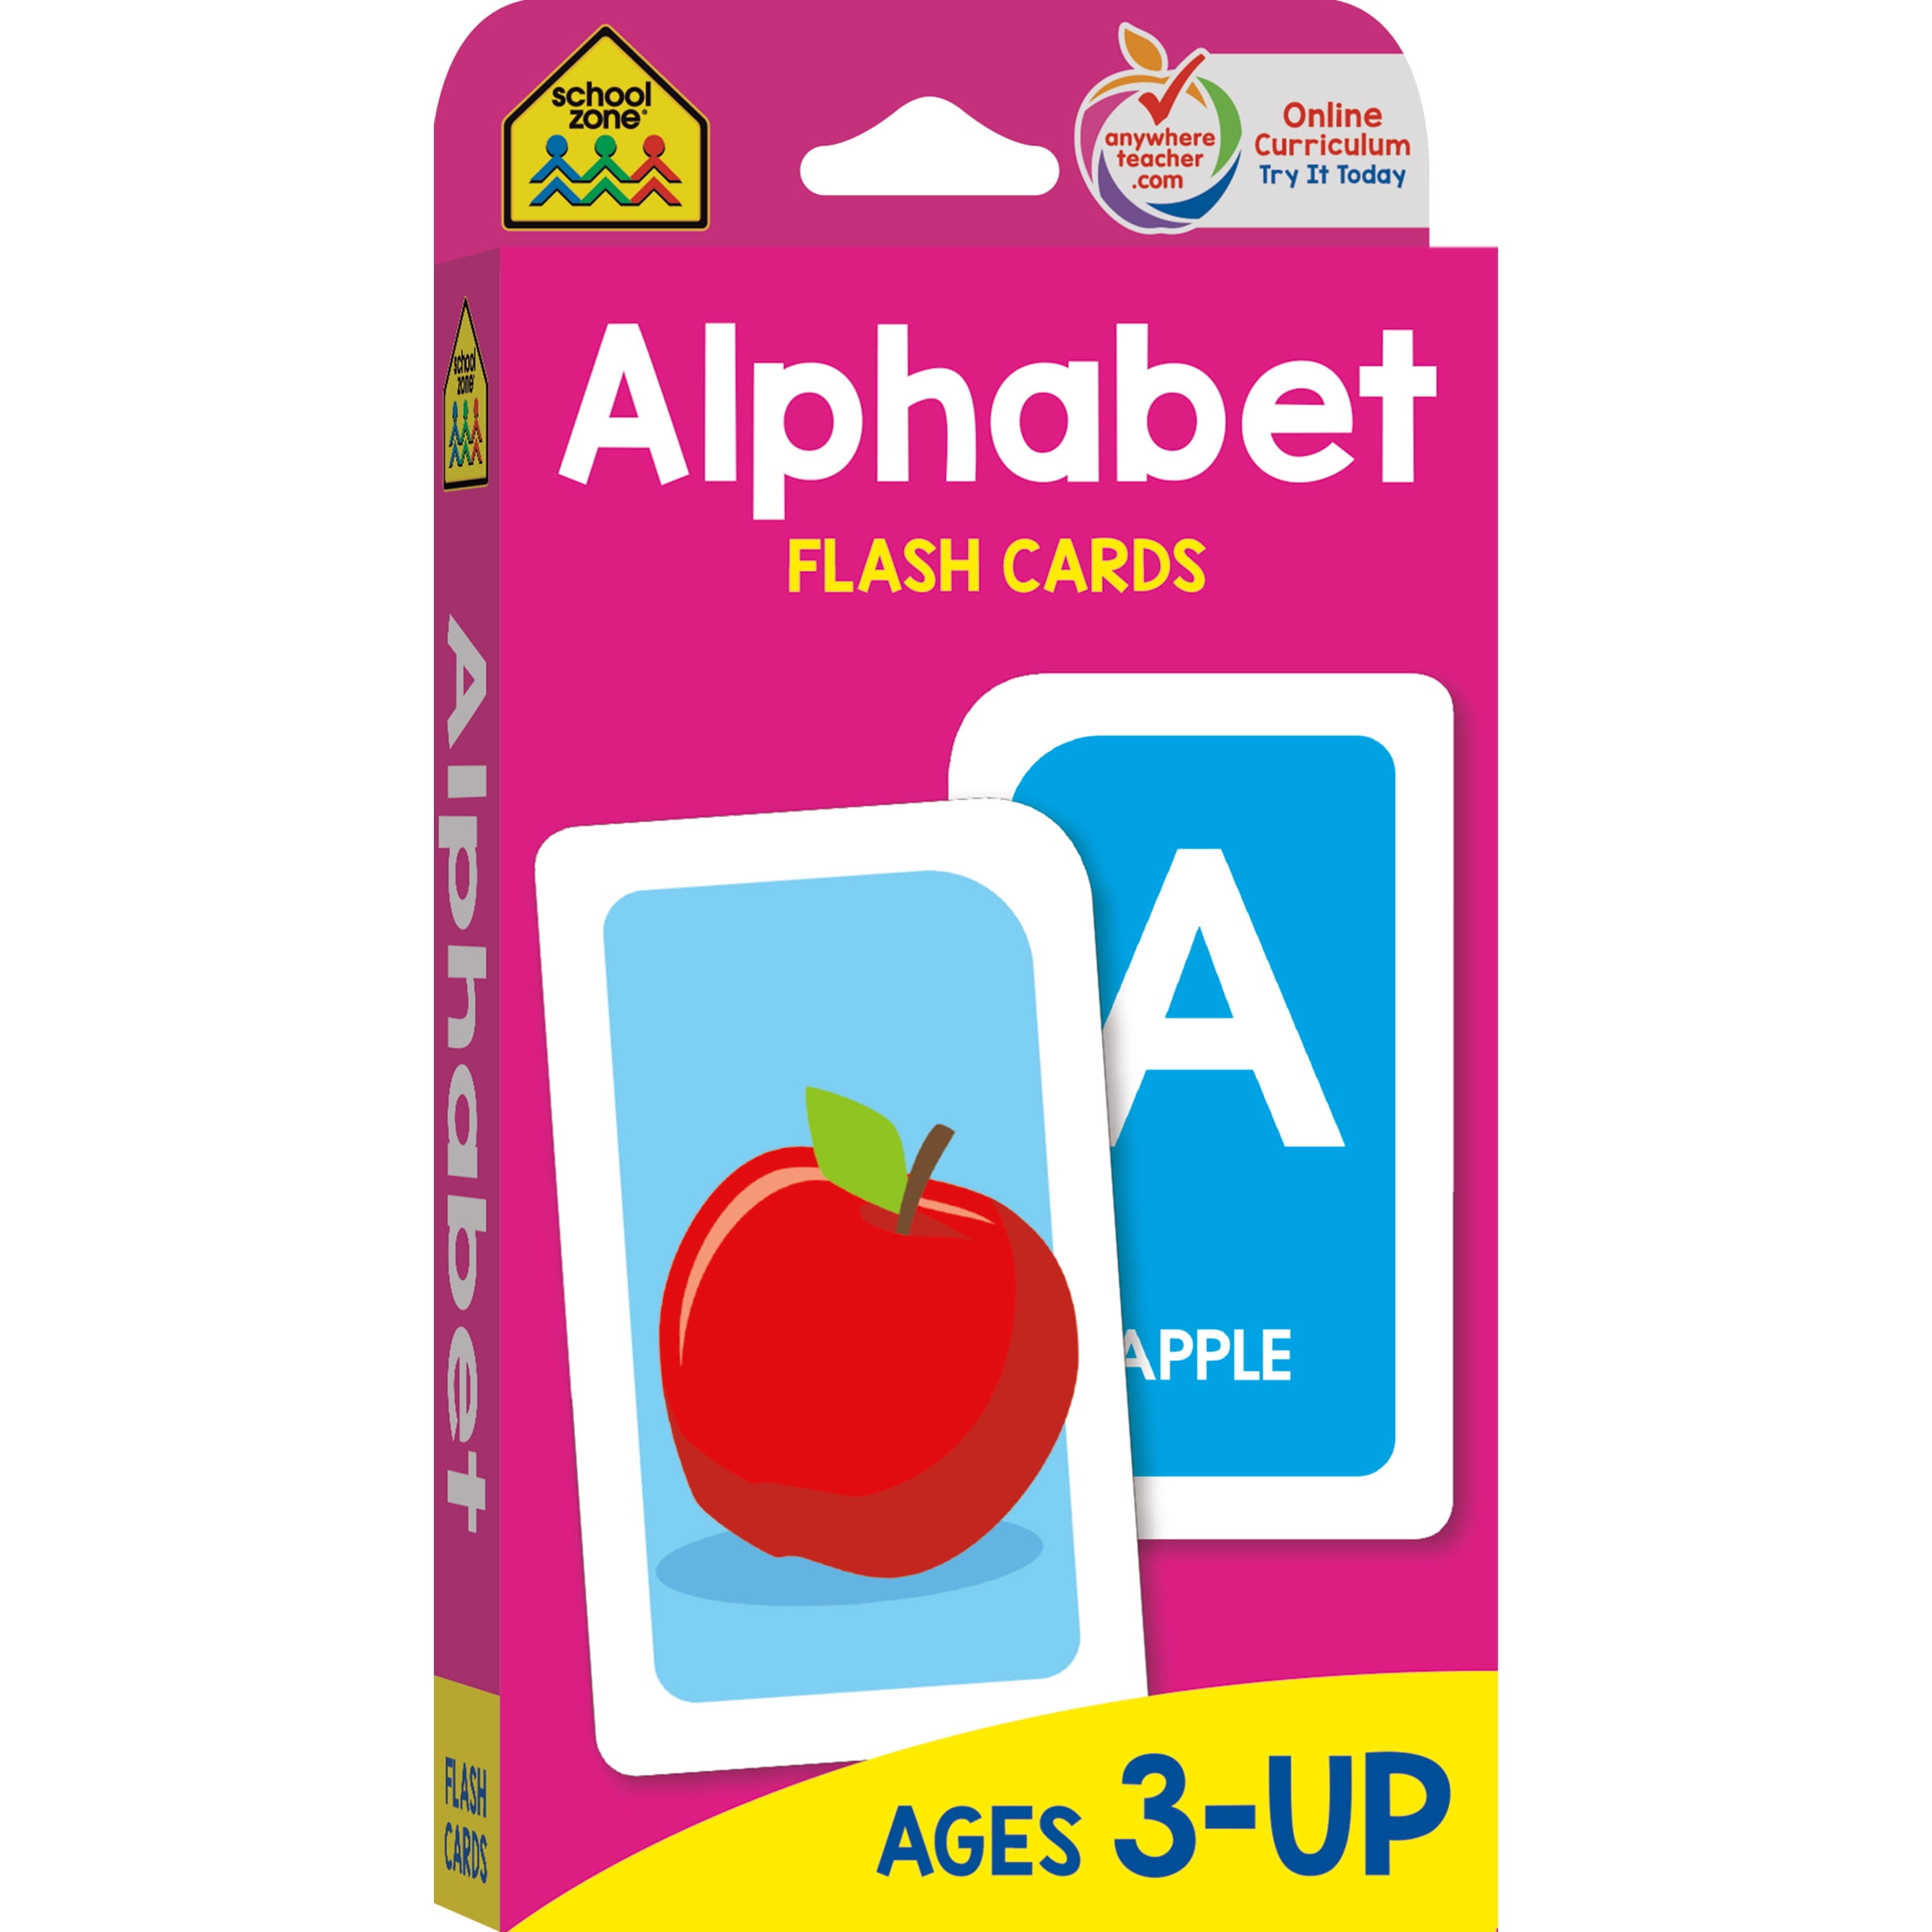 Alphabet Flash Cards For Kids ABC Early Learning Educational First Words MAGNETS 